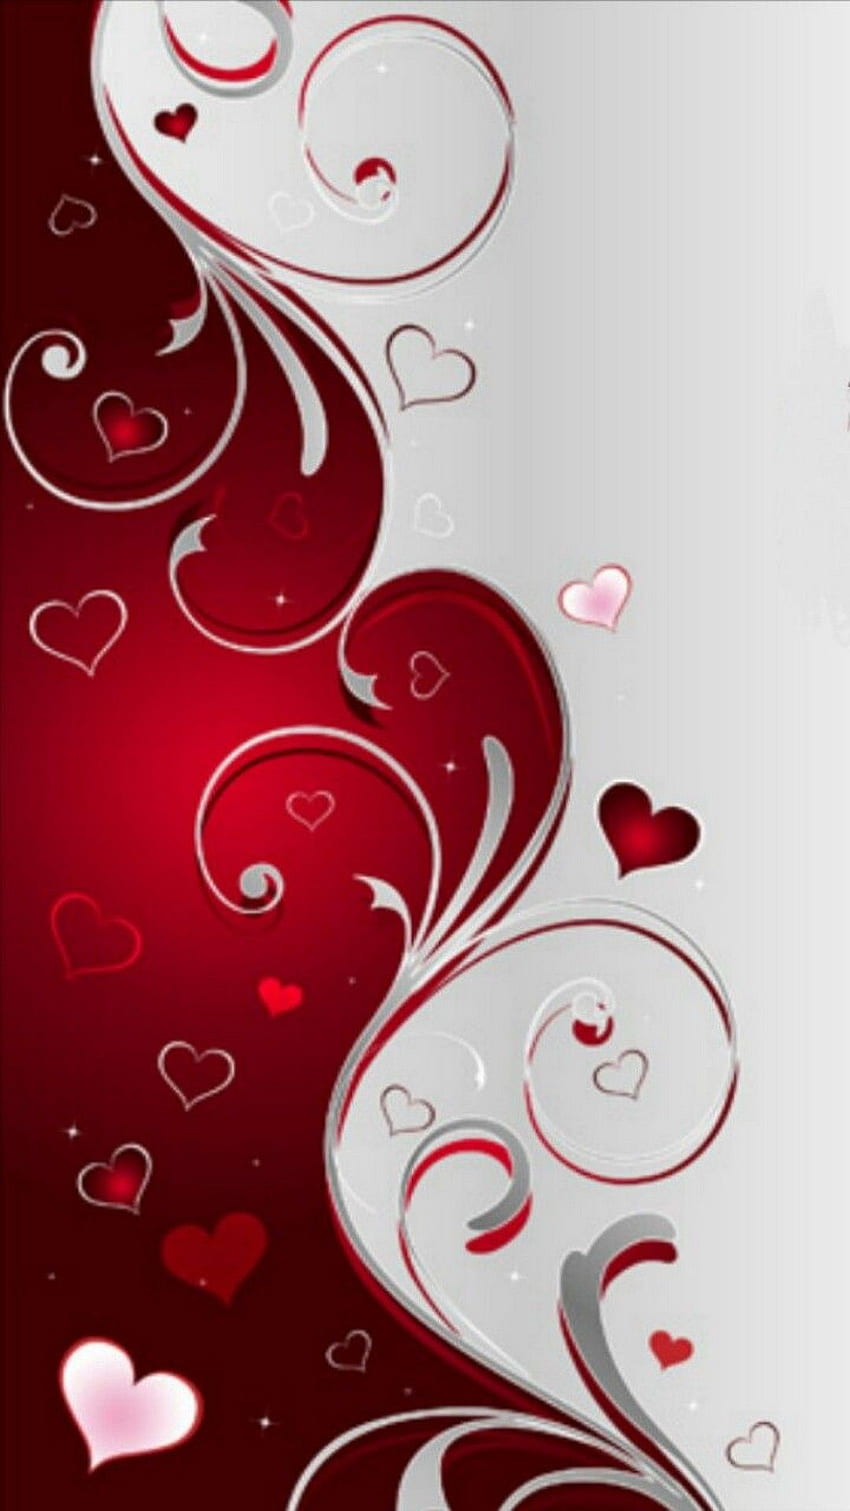 Happy Valentines Day Wallpaper for Phone  Cute Wallpaper For iPhone